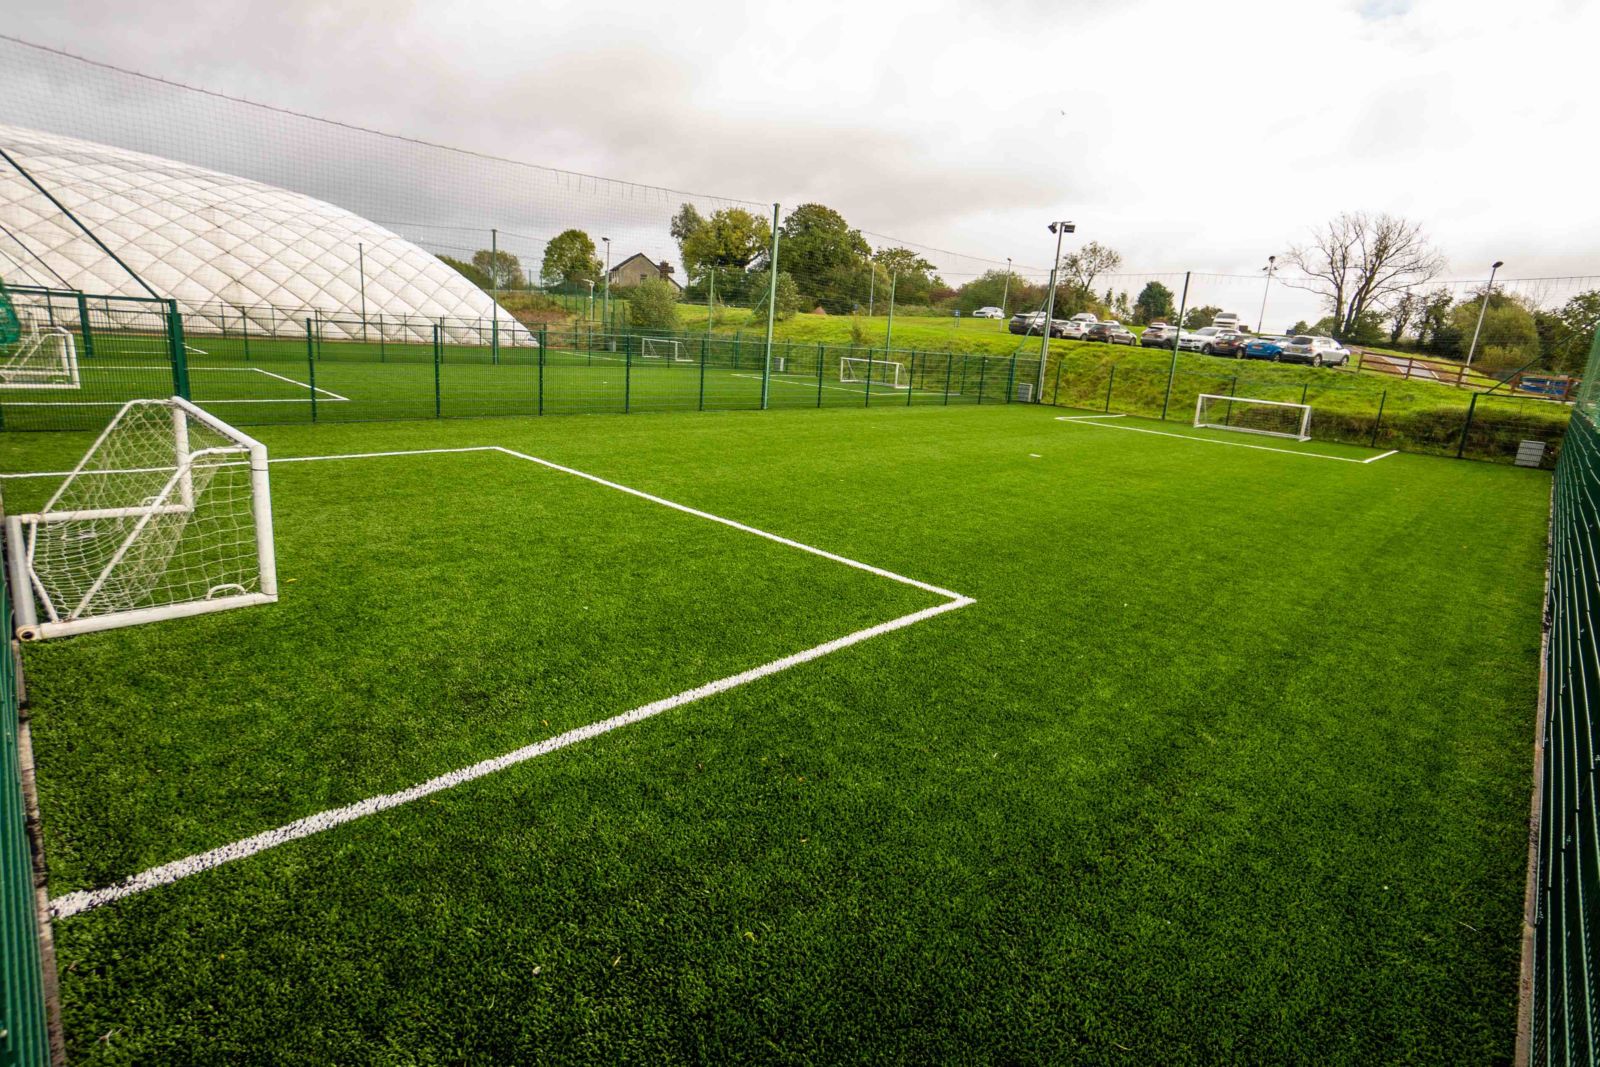 Colin Glen Outdoor Pitches